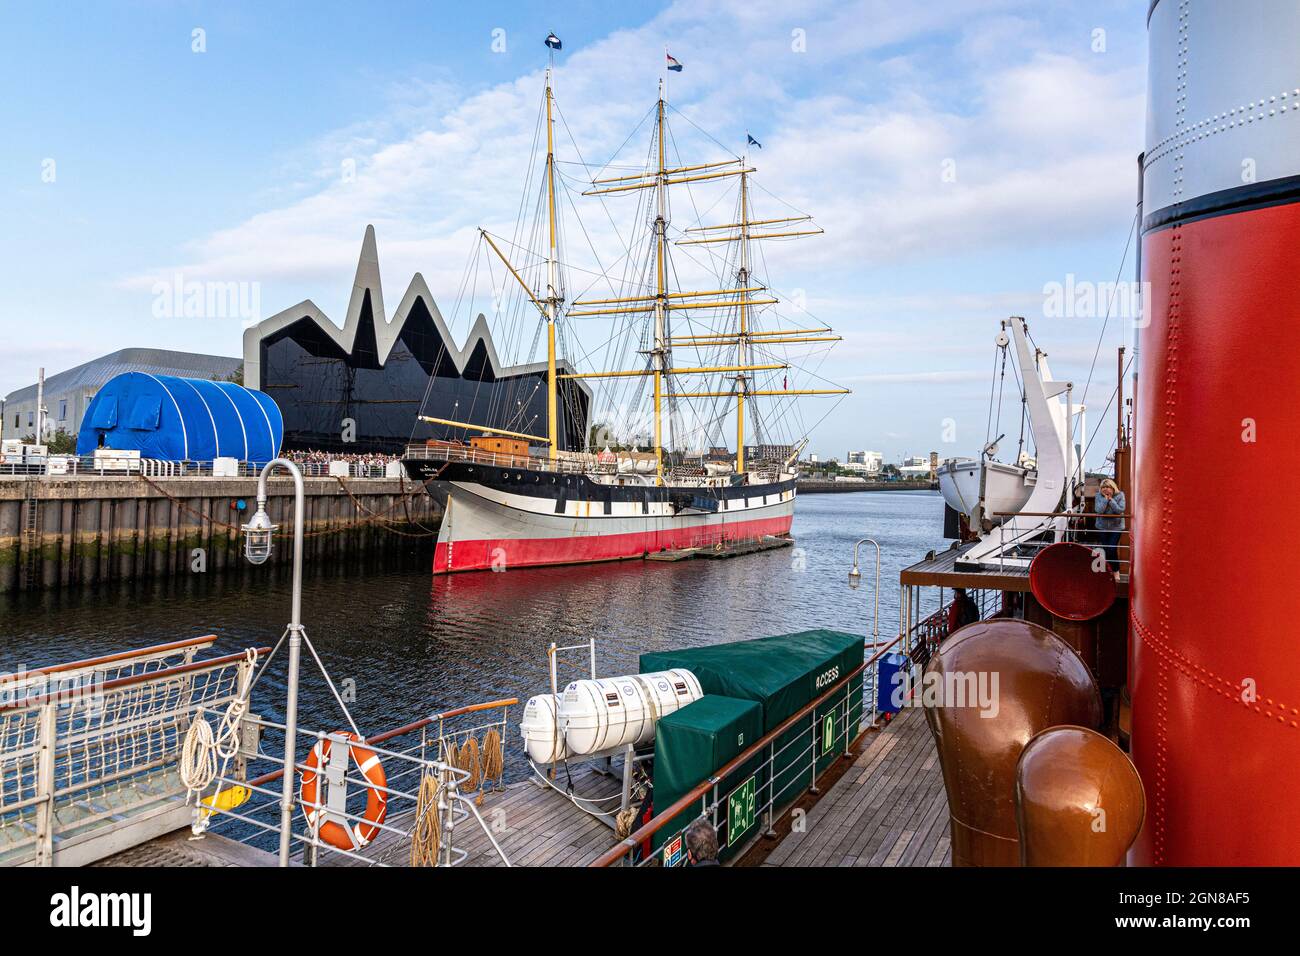 Tall ship Glenlee beside the Riverside Museum of Transport on the banks of the River Clyde viewed from the paddlesteamer Waverley, Glasgow, Scotland. Stock Photo